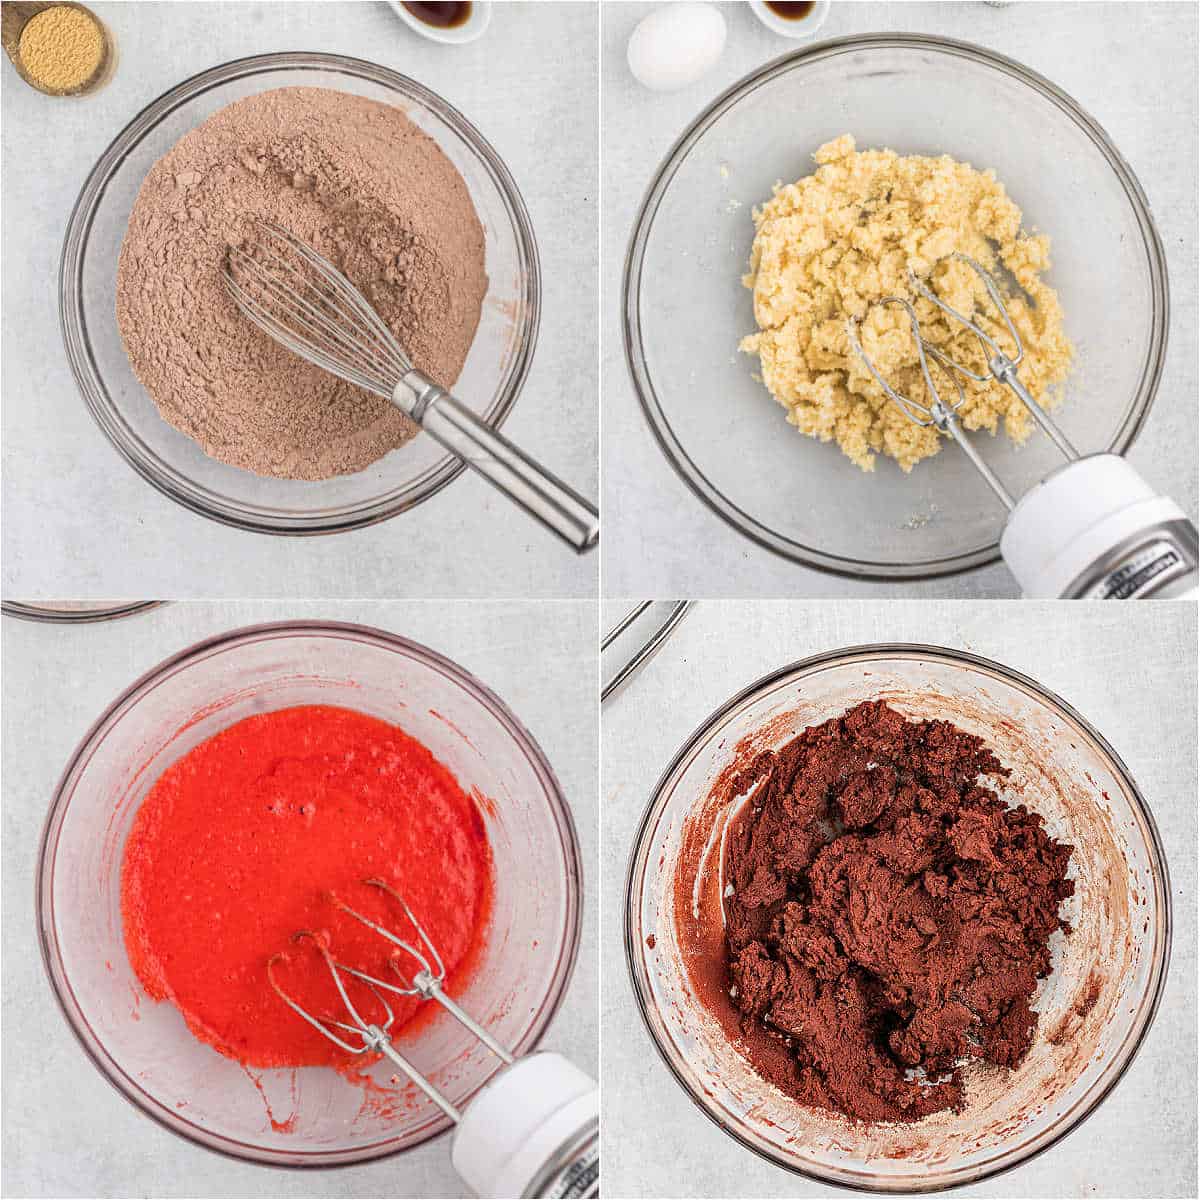 Step by step photos showing how to make red velvet crinkle cookie dough.